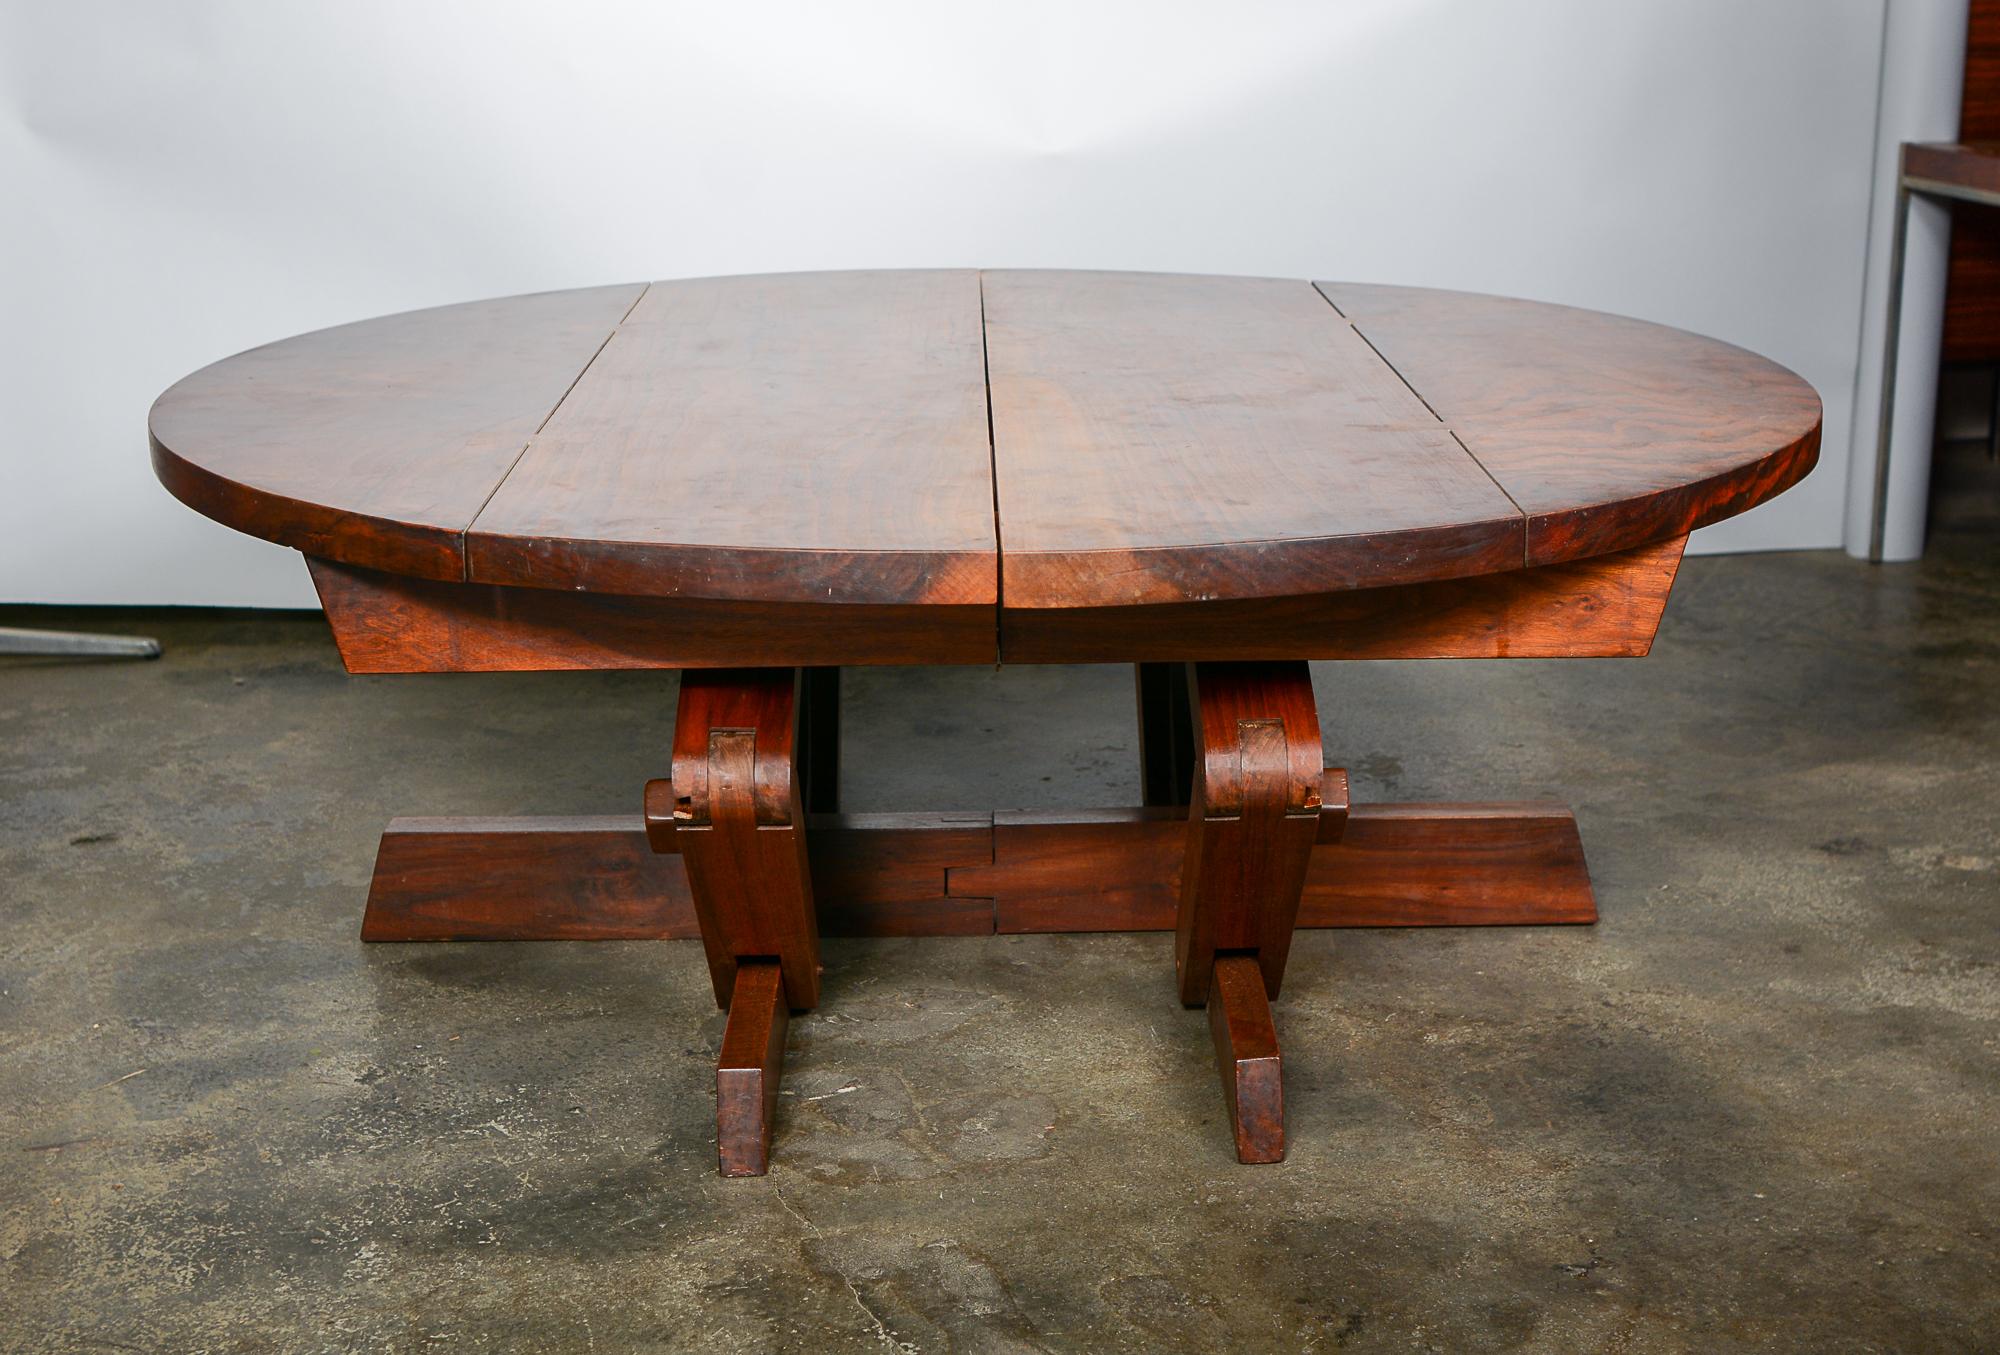 Walnut Dining Table with Four Leaves by Designer and Craftsman Morris Sheppard For Sale 6